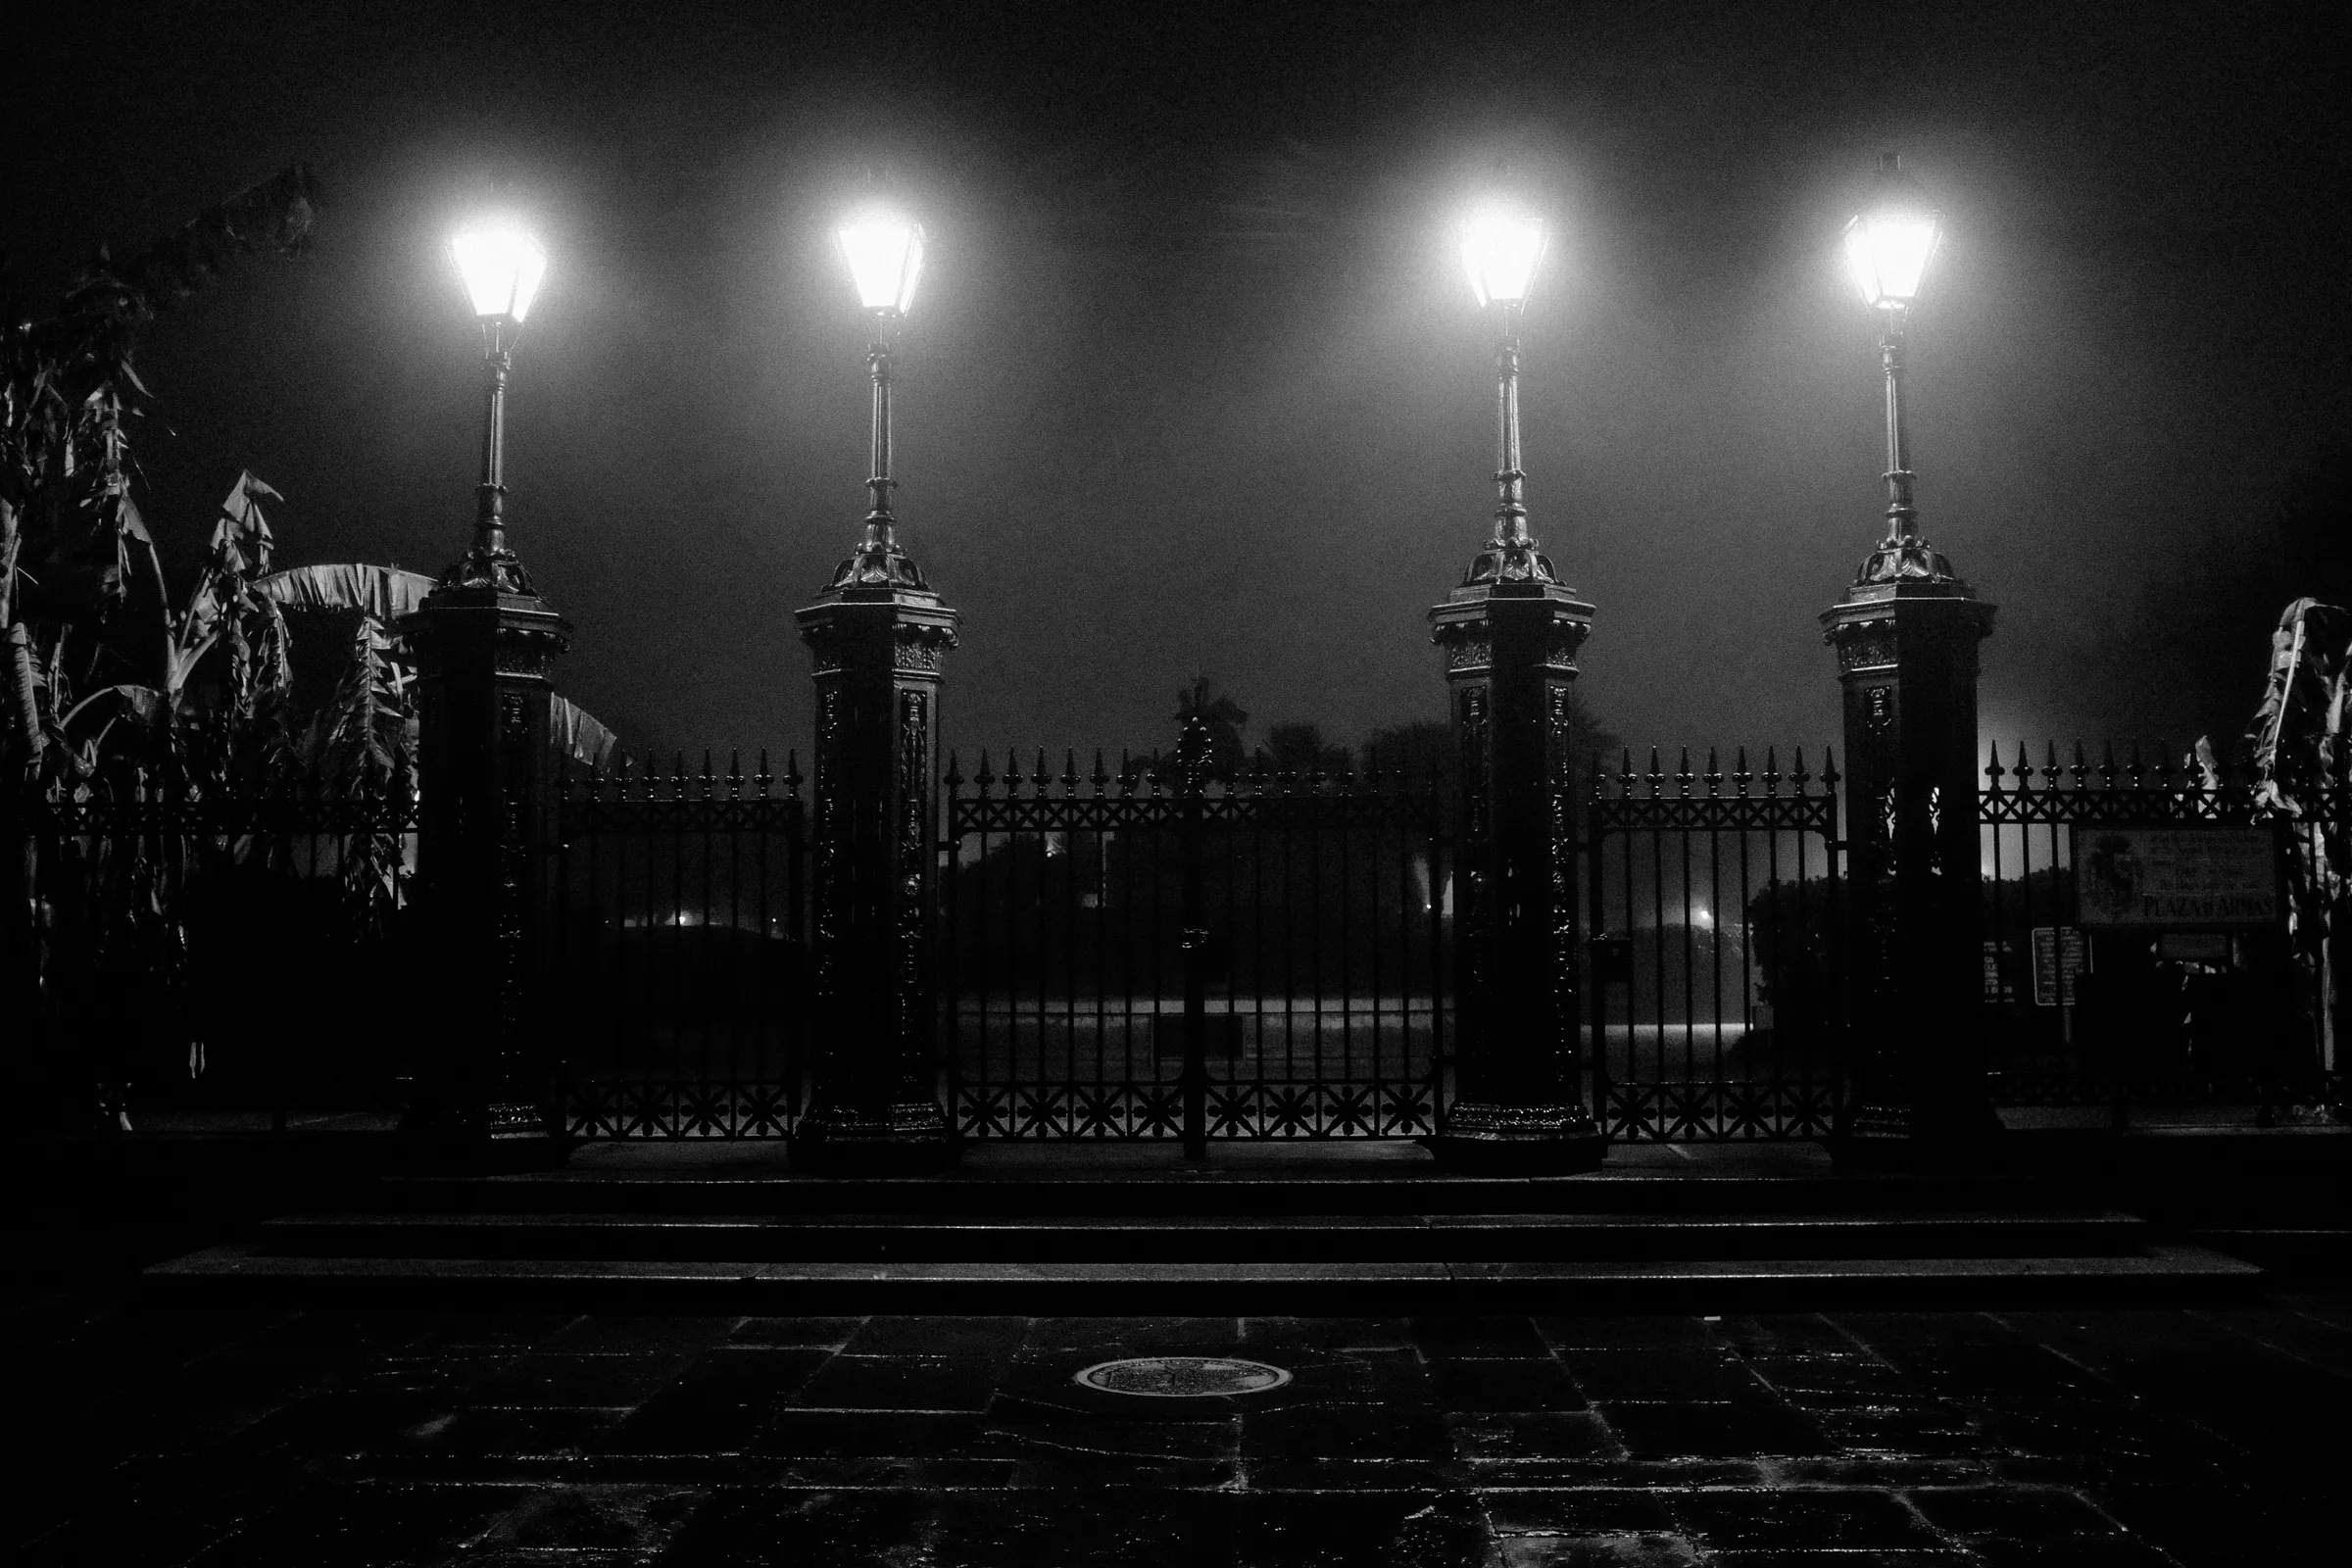 Four large lamps above the closed gate, along the fence outside of Jackson Square, their light dispersing into the evening fog.